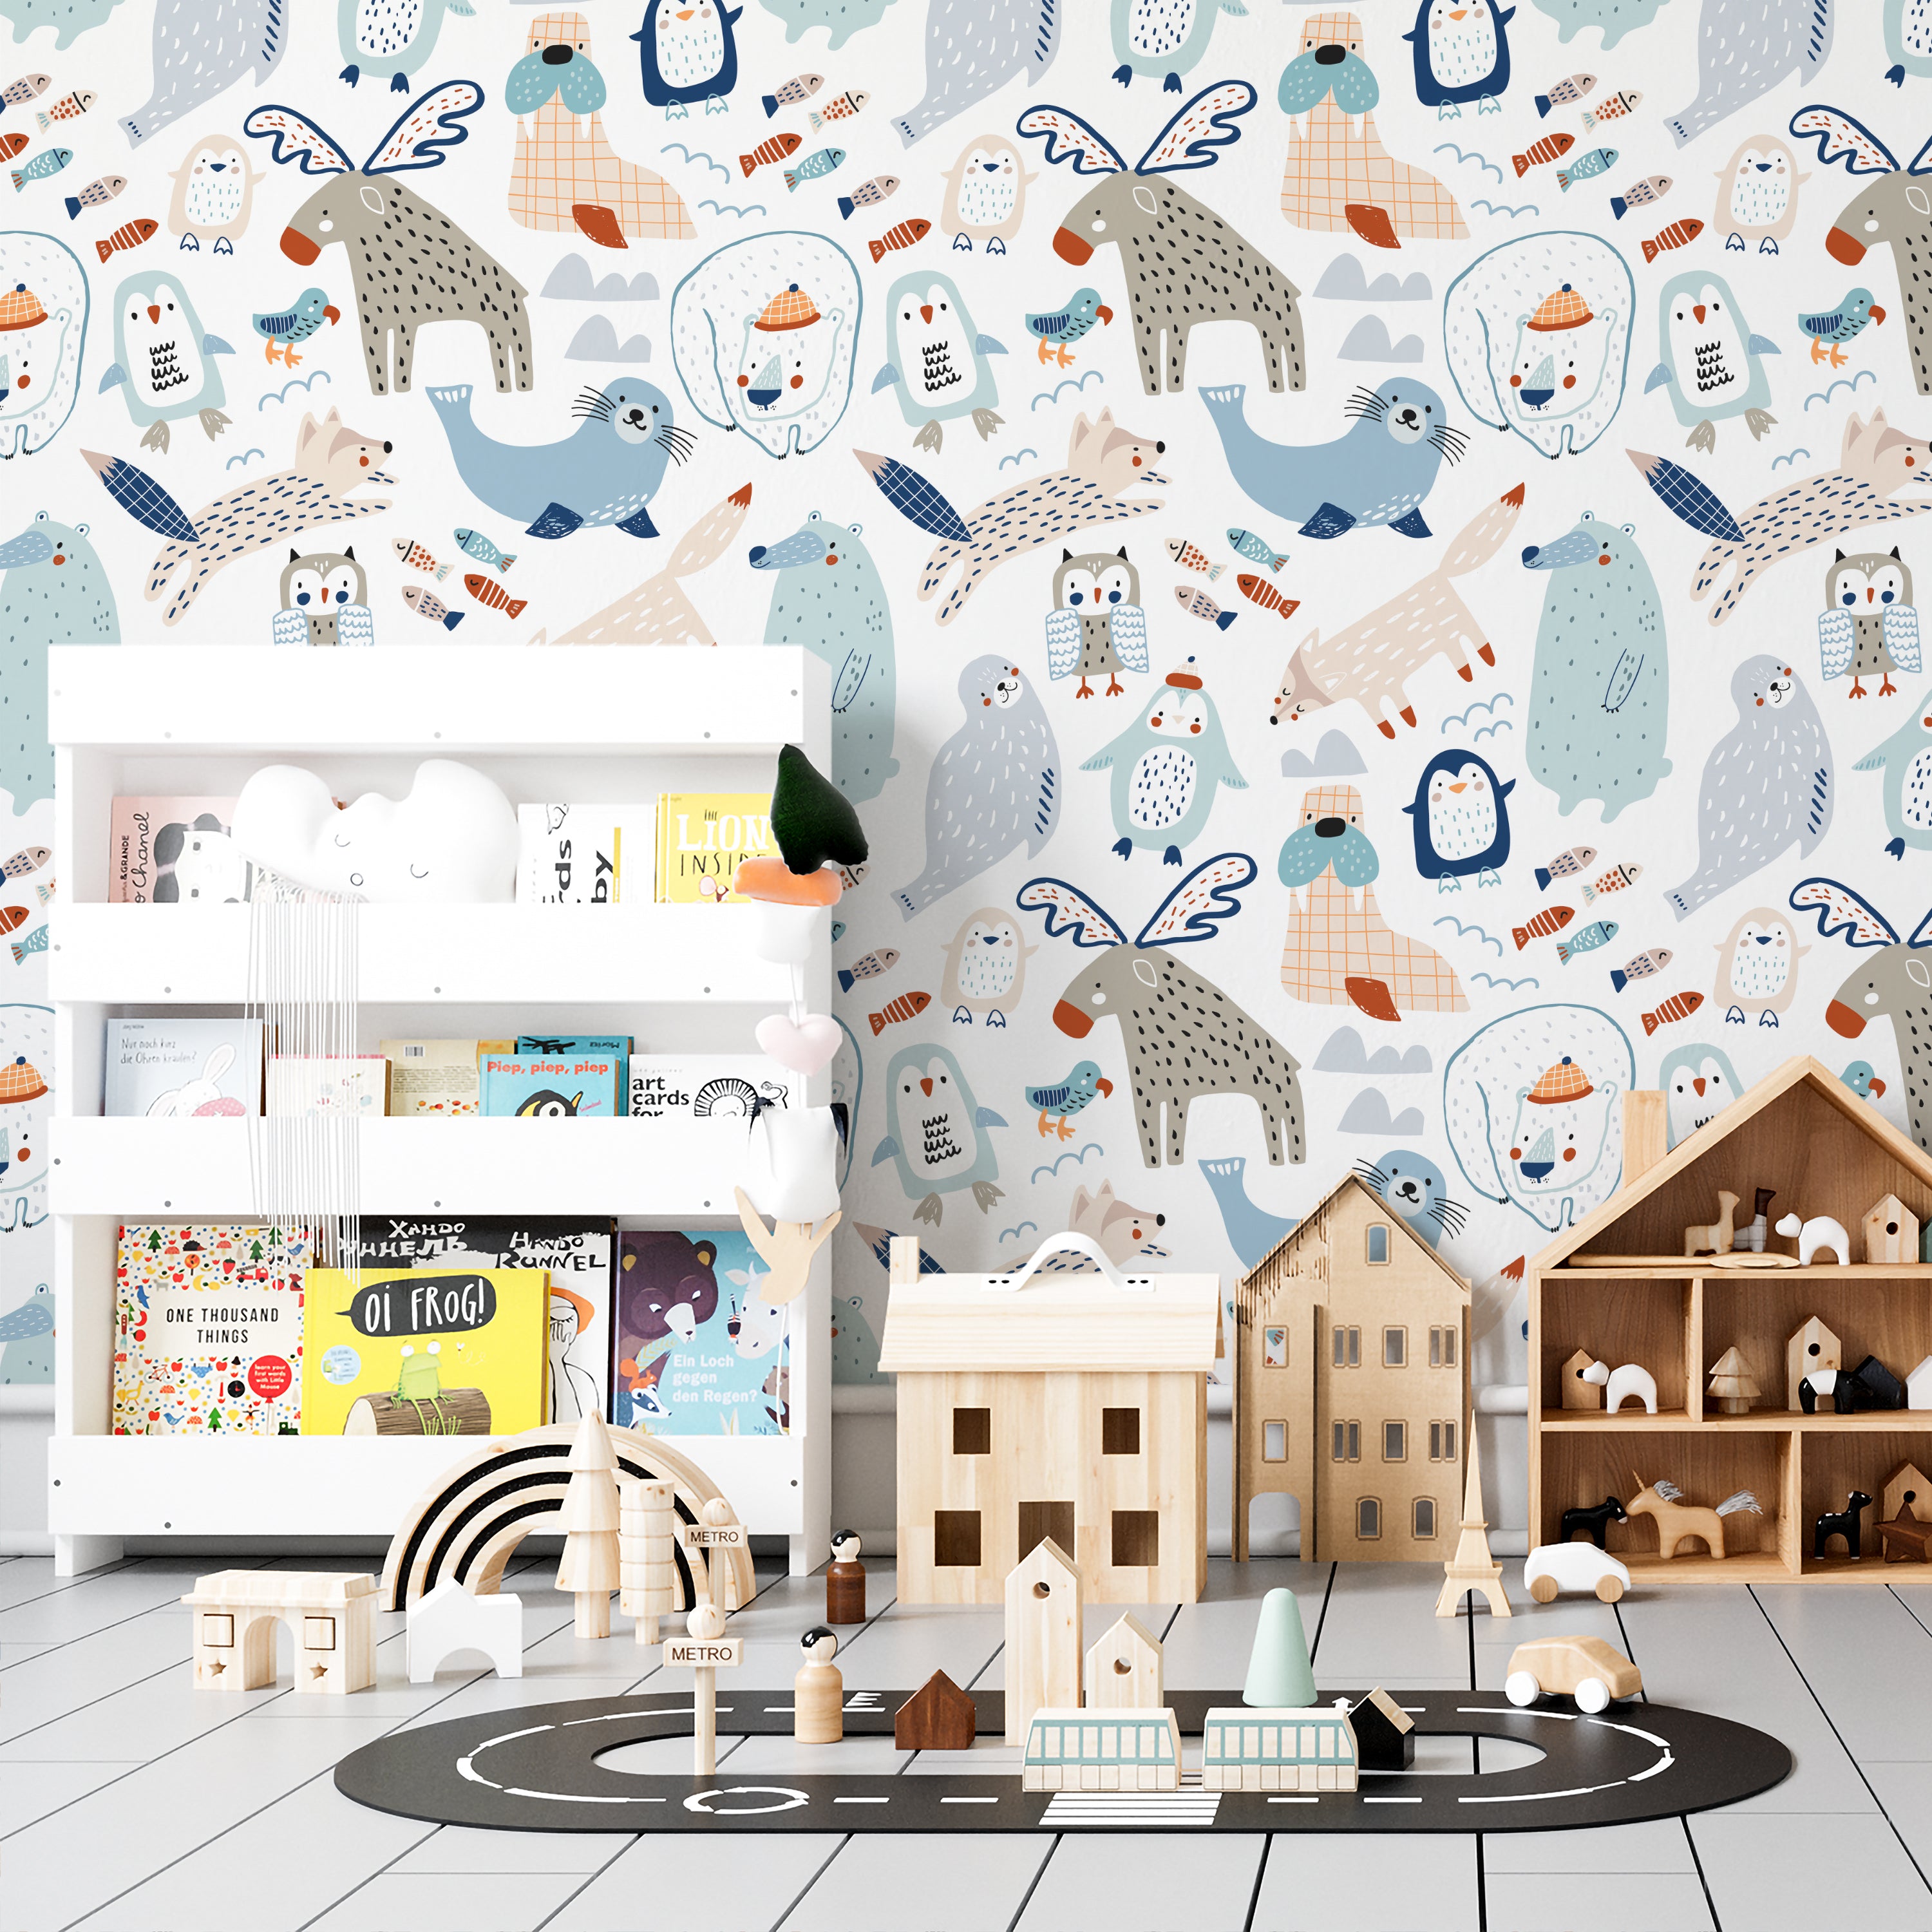 A nursery room decorated with "Nordic Moose Wallpaper" showing a vibrant and playful animal pattern. The room includes a white bookshelf filled with children's books and toys, a wooden playhouse, and a toy car track, all complemented by the cheerful wall design.